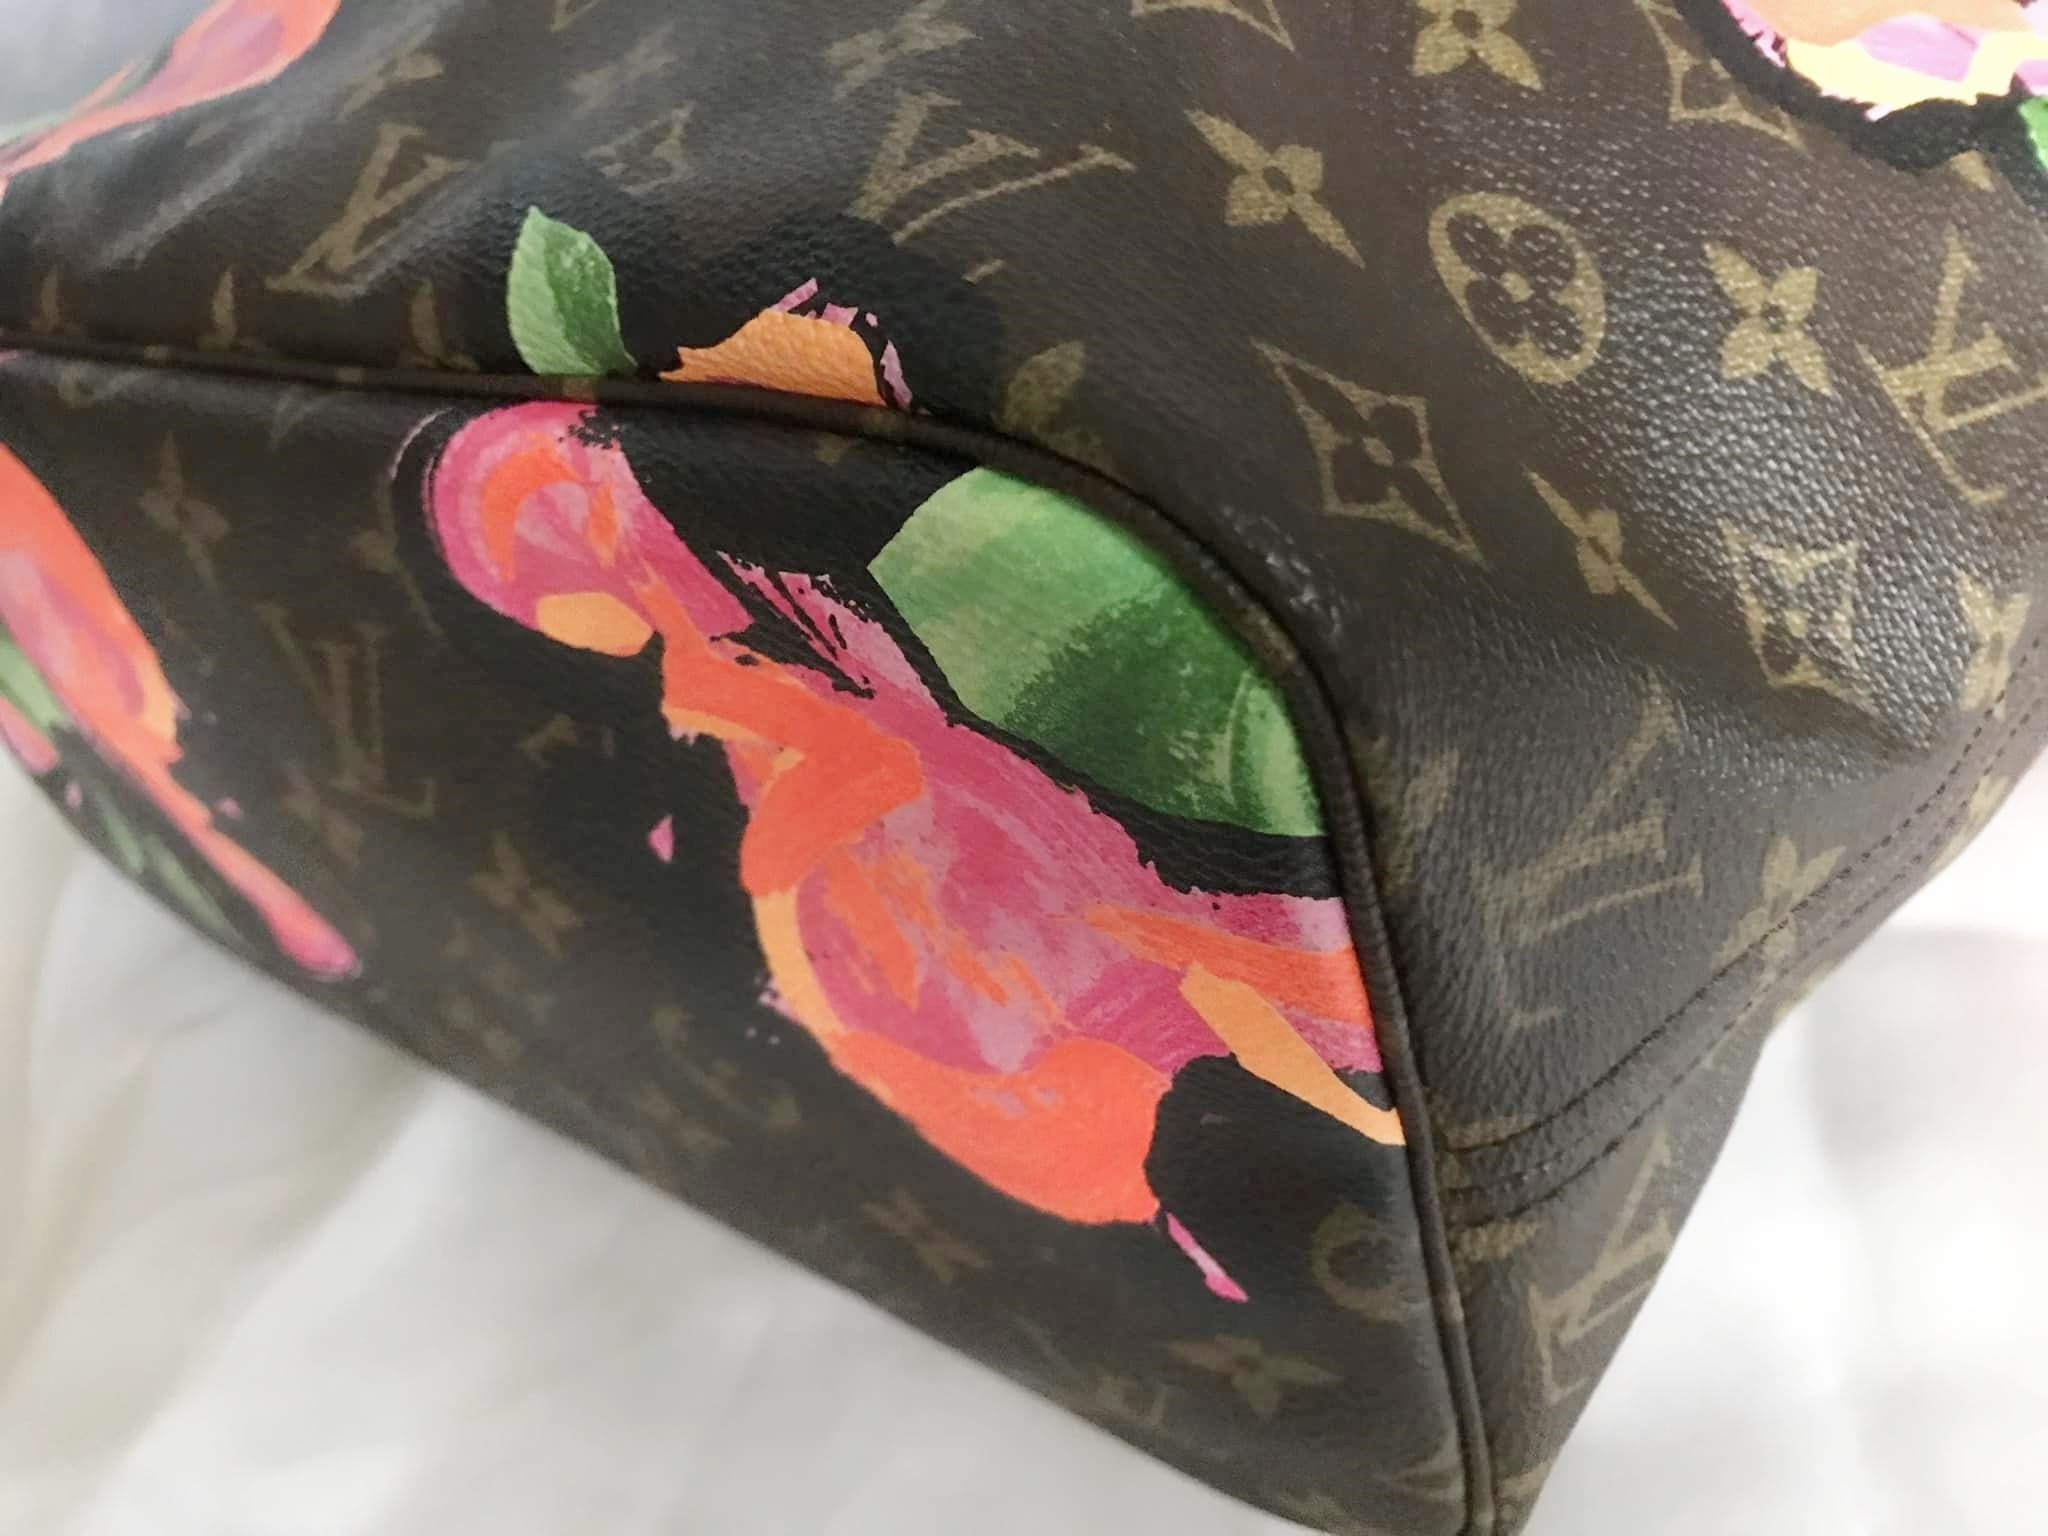 SOLD Was FOR SALE Louis Vuitton Authentic Neverfull Sprouse Roses  limited edition! 